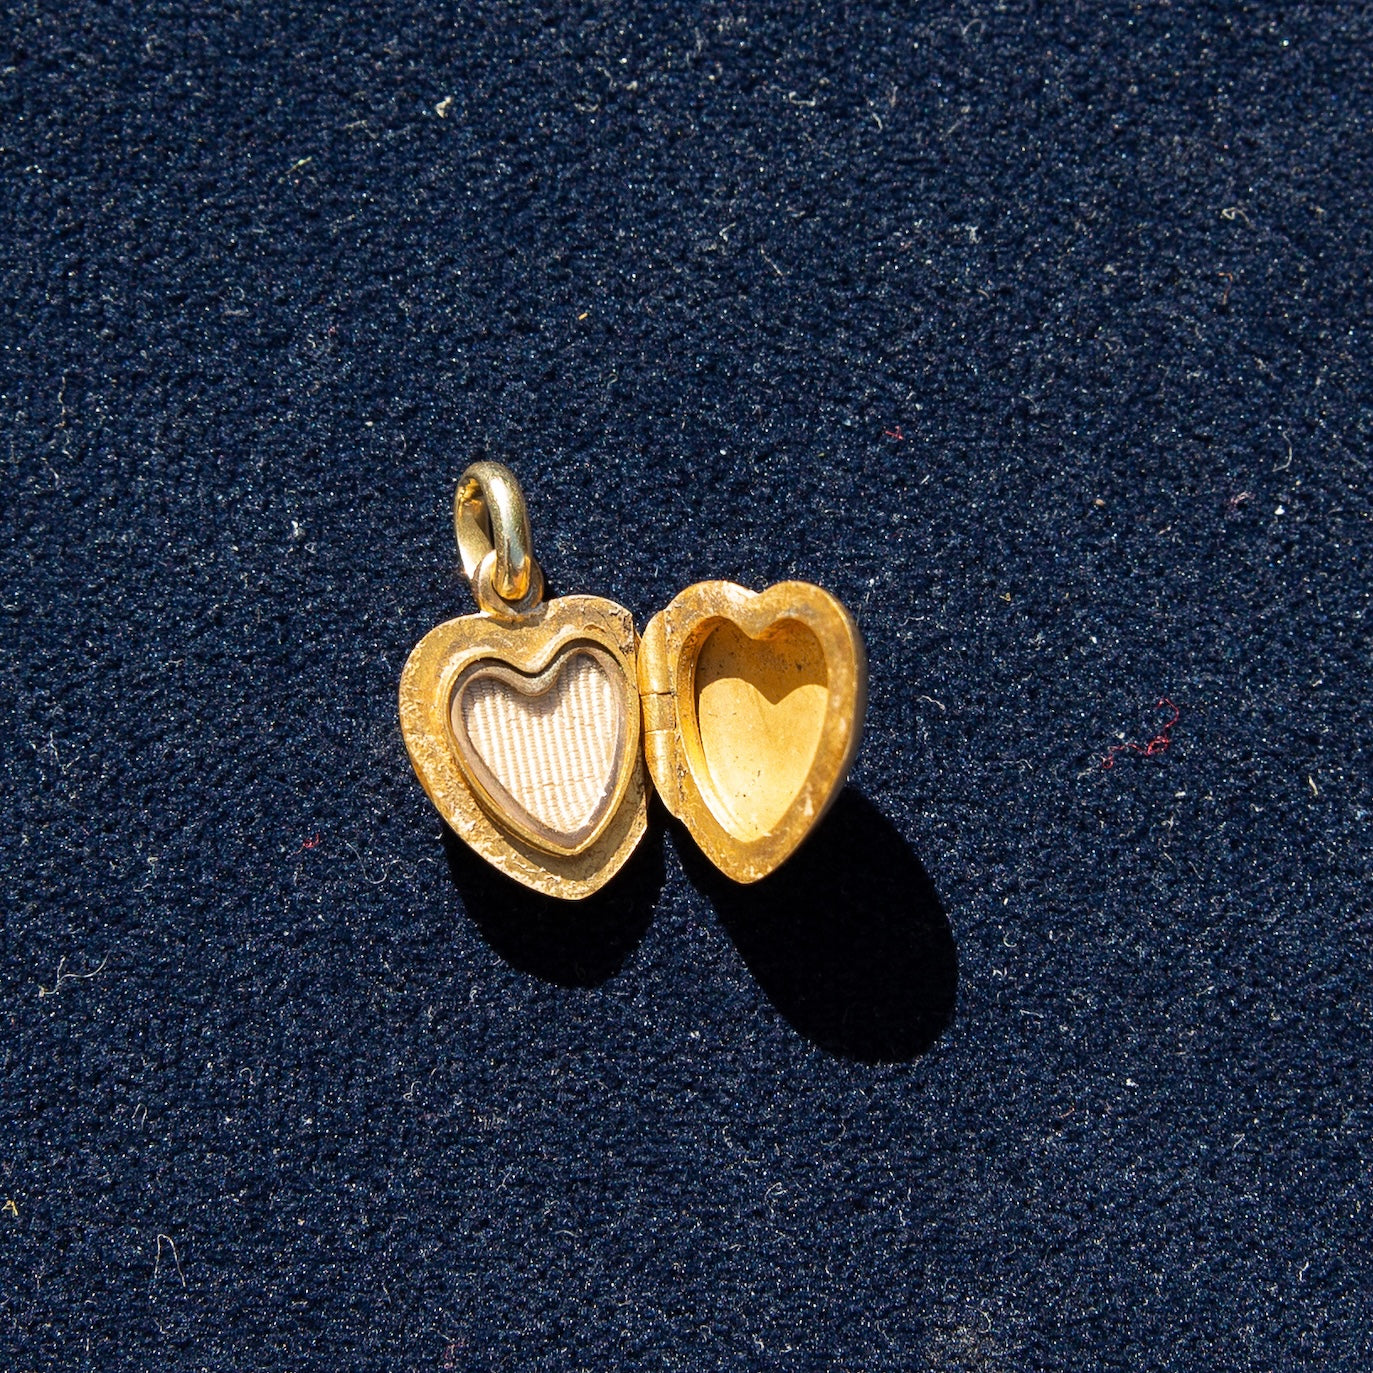 Sold at Auction: A 9K Yellow Gold Heart Locket Pendant on a 9K